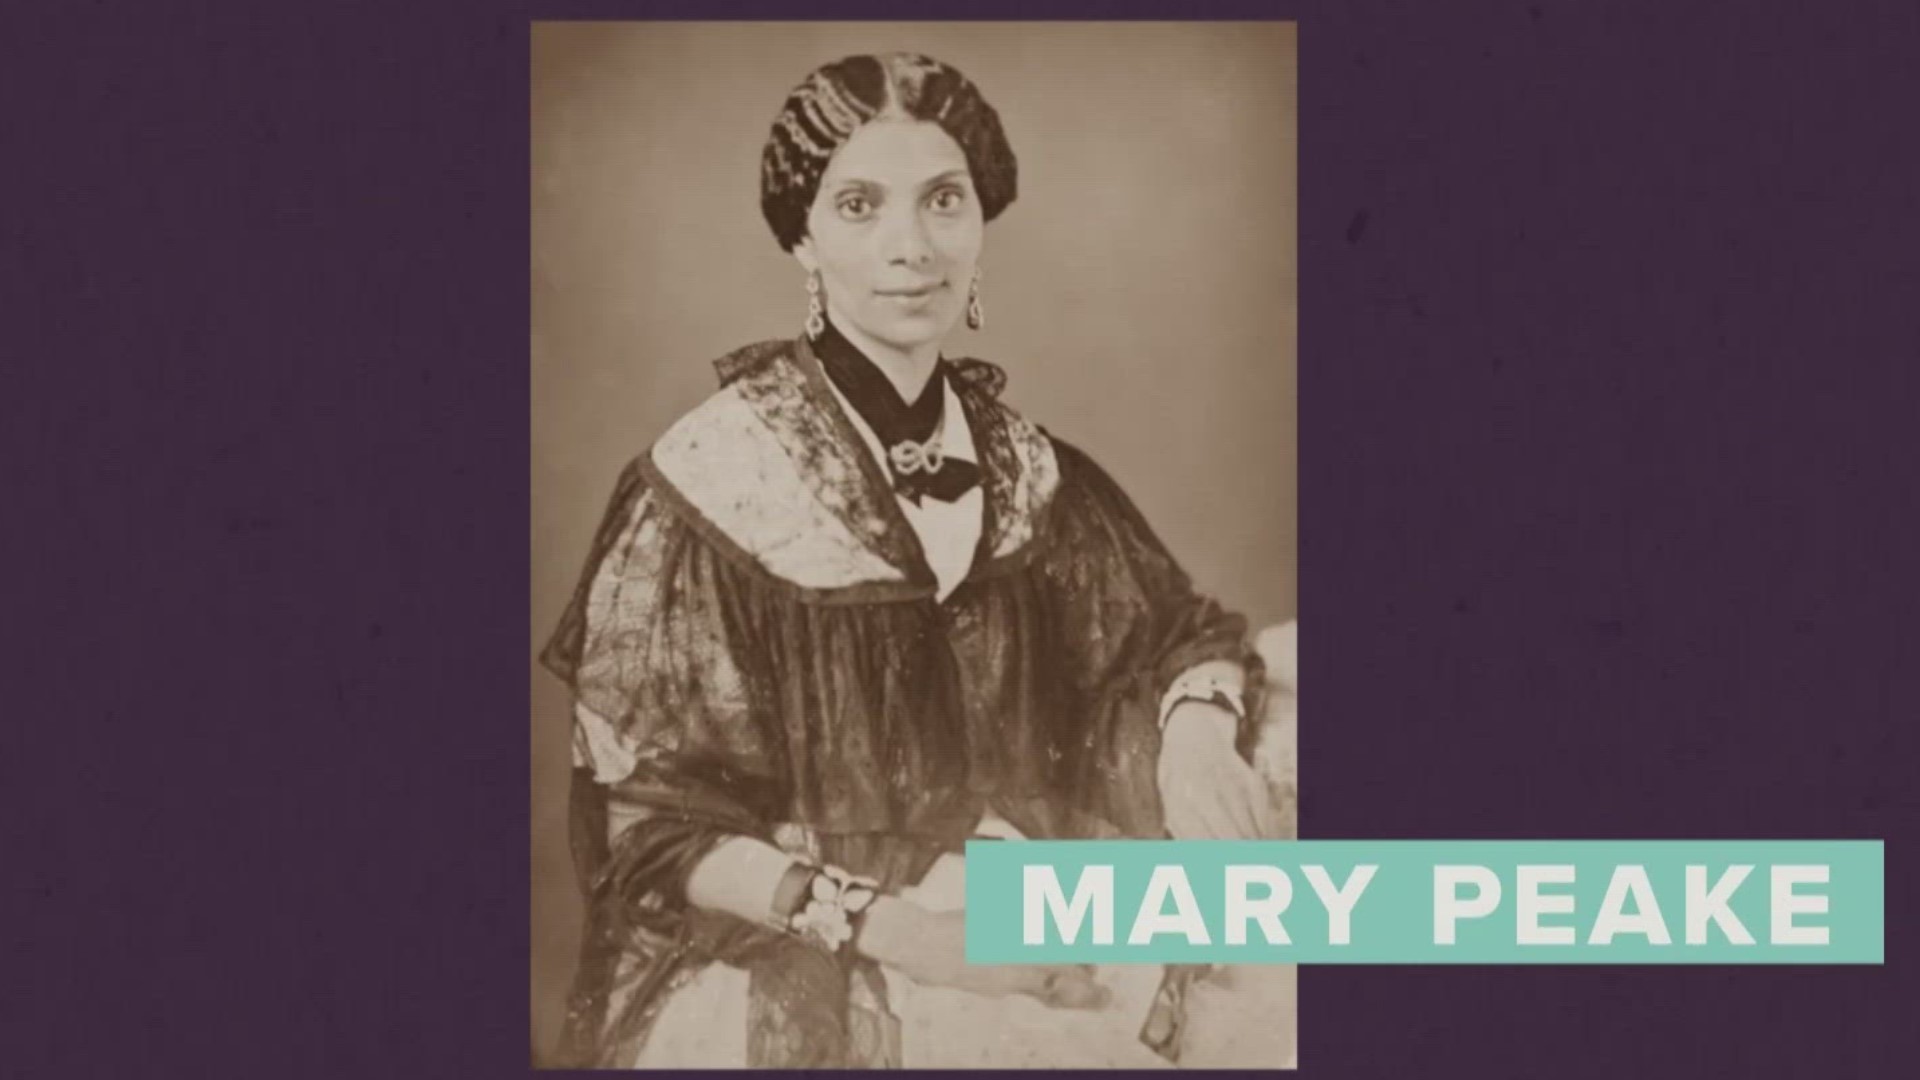 A life-long educator, Mary Peake instructed a growing number of escaped slaves, fleeing bondage and the war in the South.